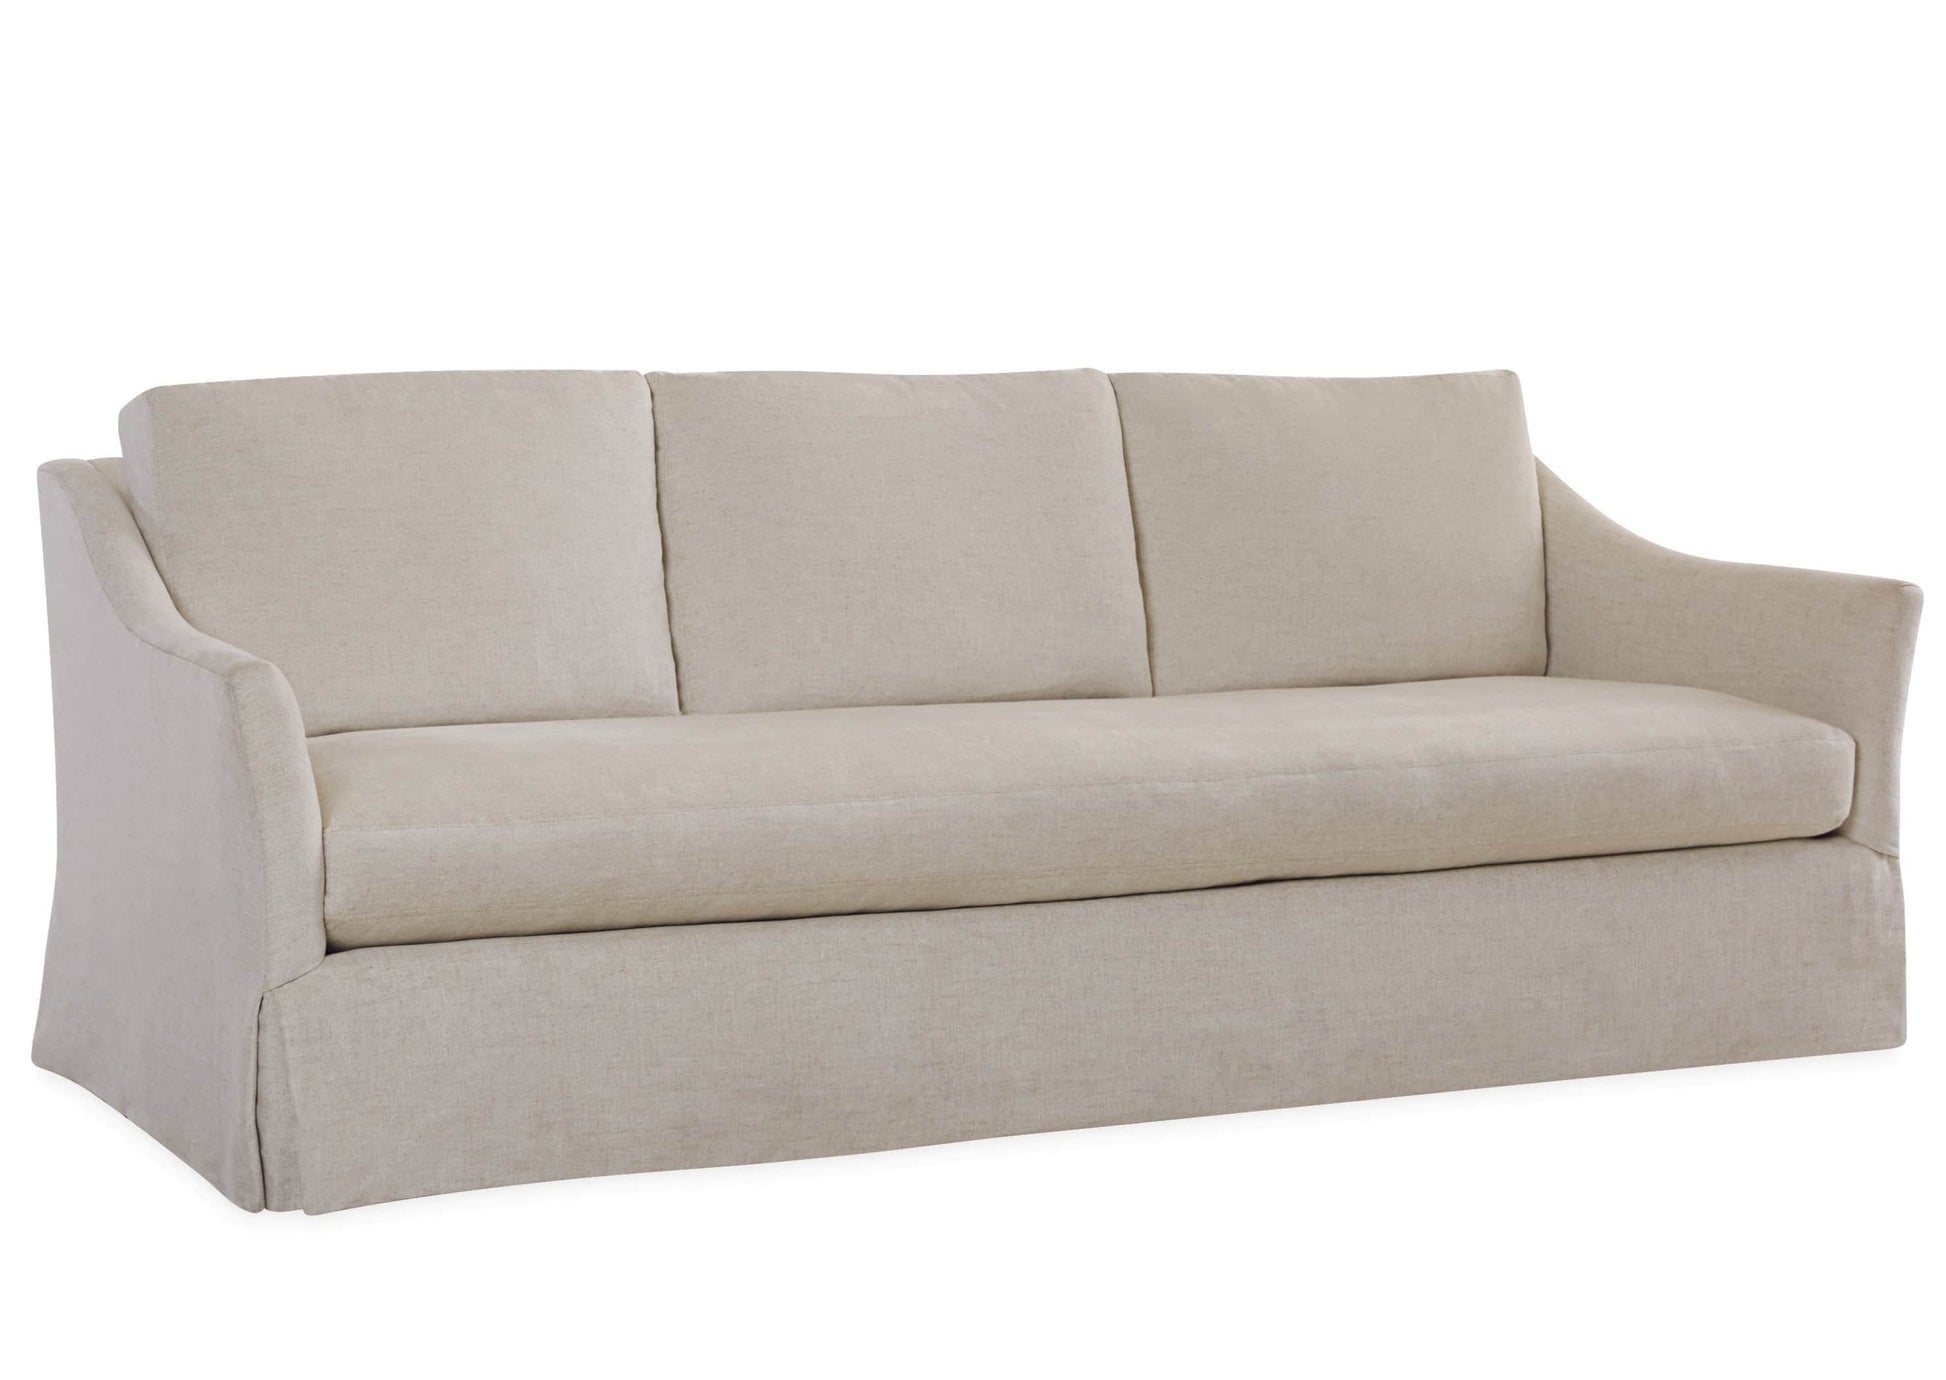 Lee Industries 3511-03 Sofa in a gray fabric with curve arm. 